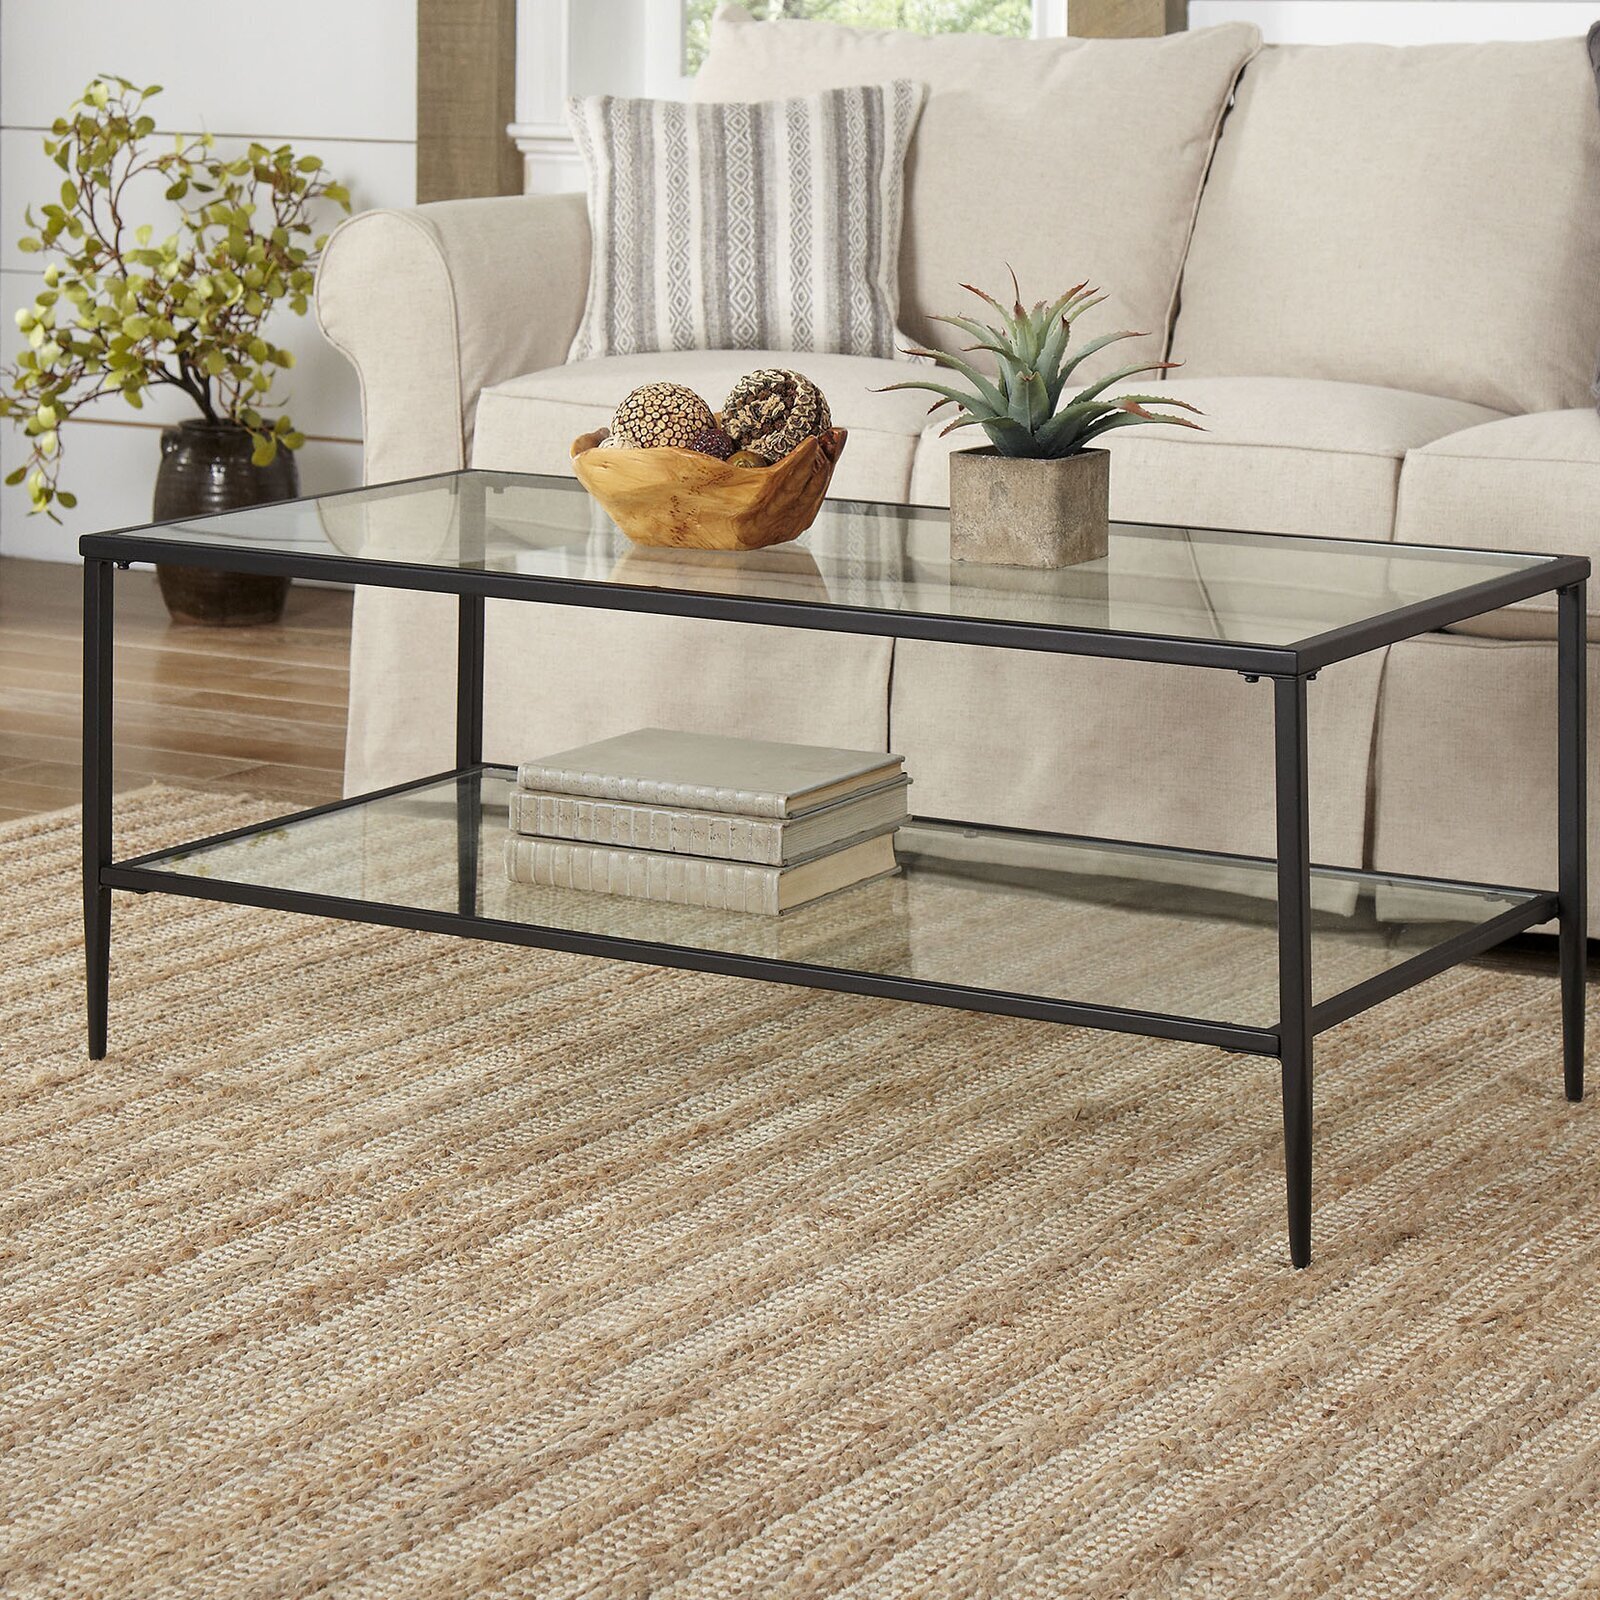 Glass Coffee Table with Storage